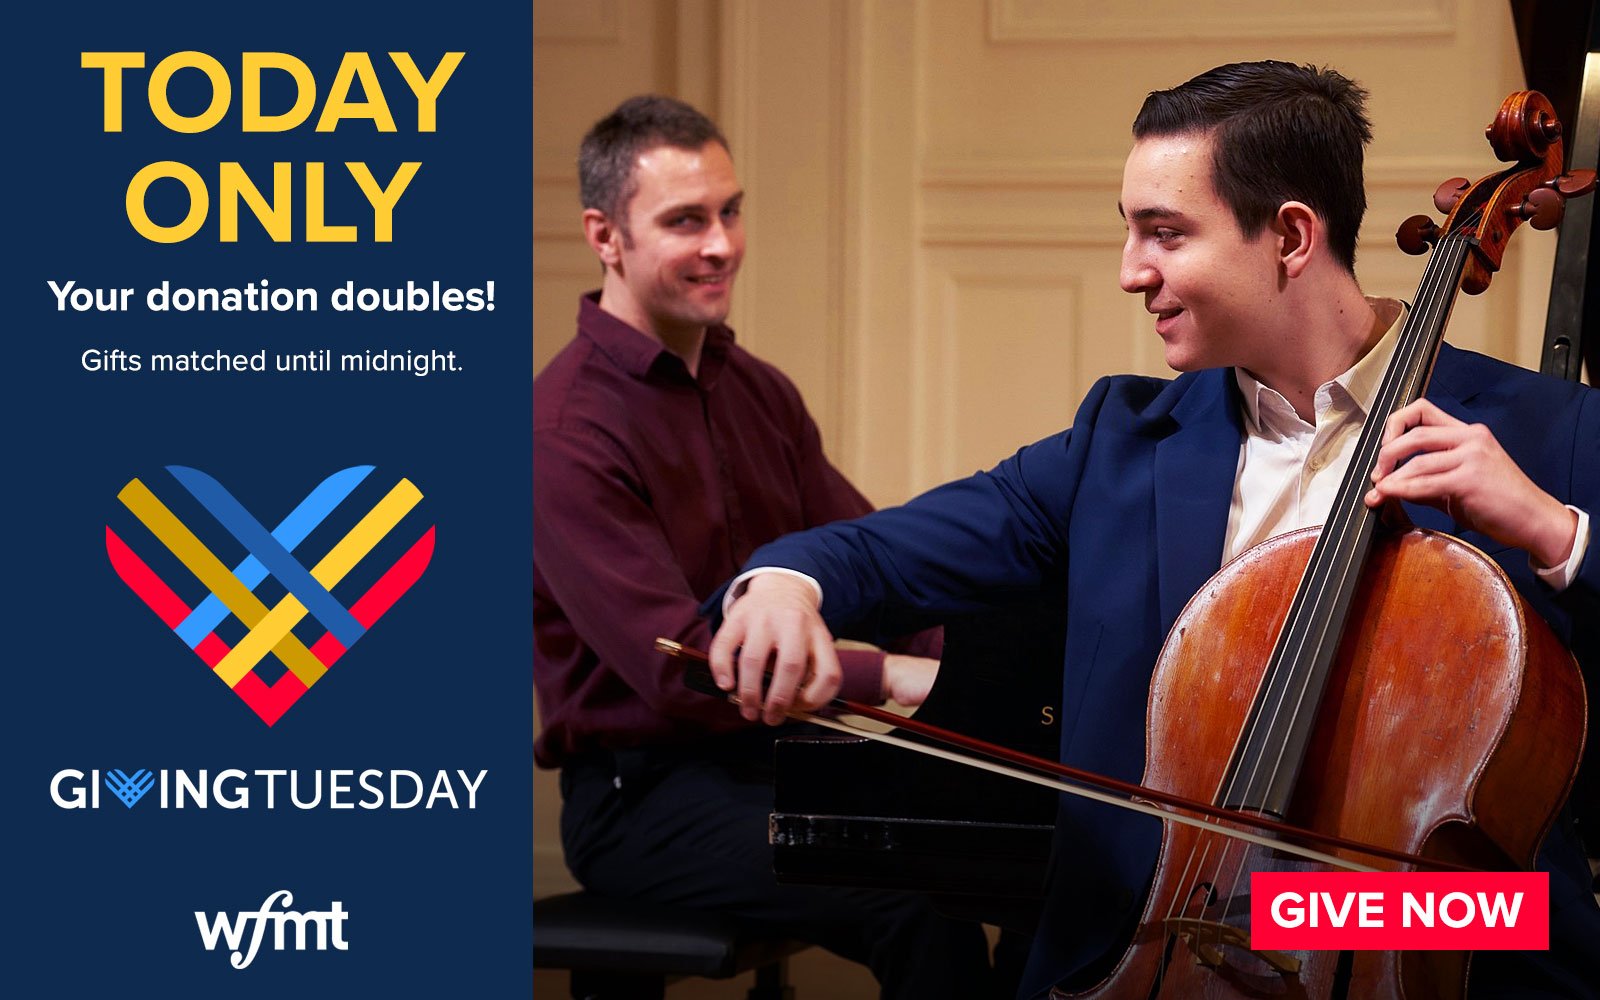 Donate to WFMT on Giving Tuesday!